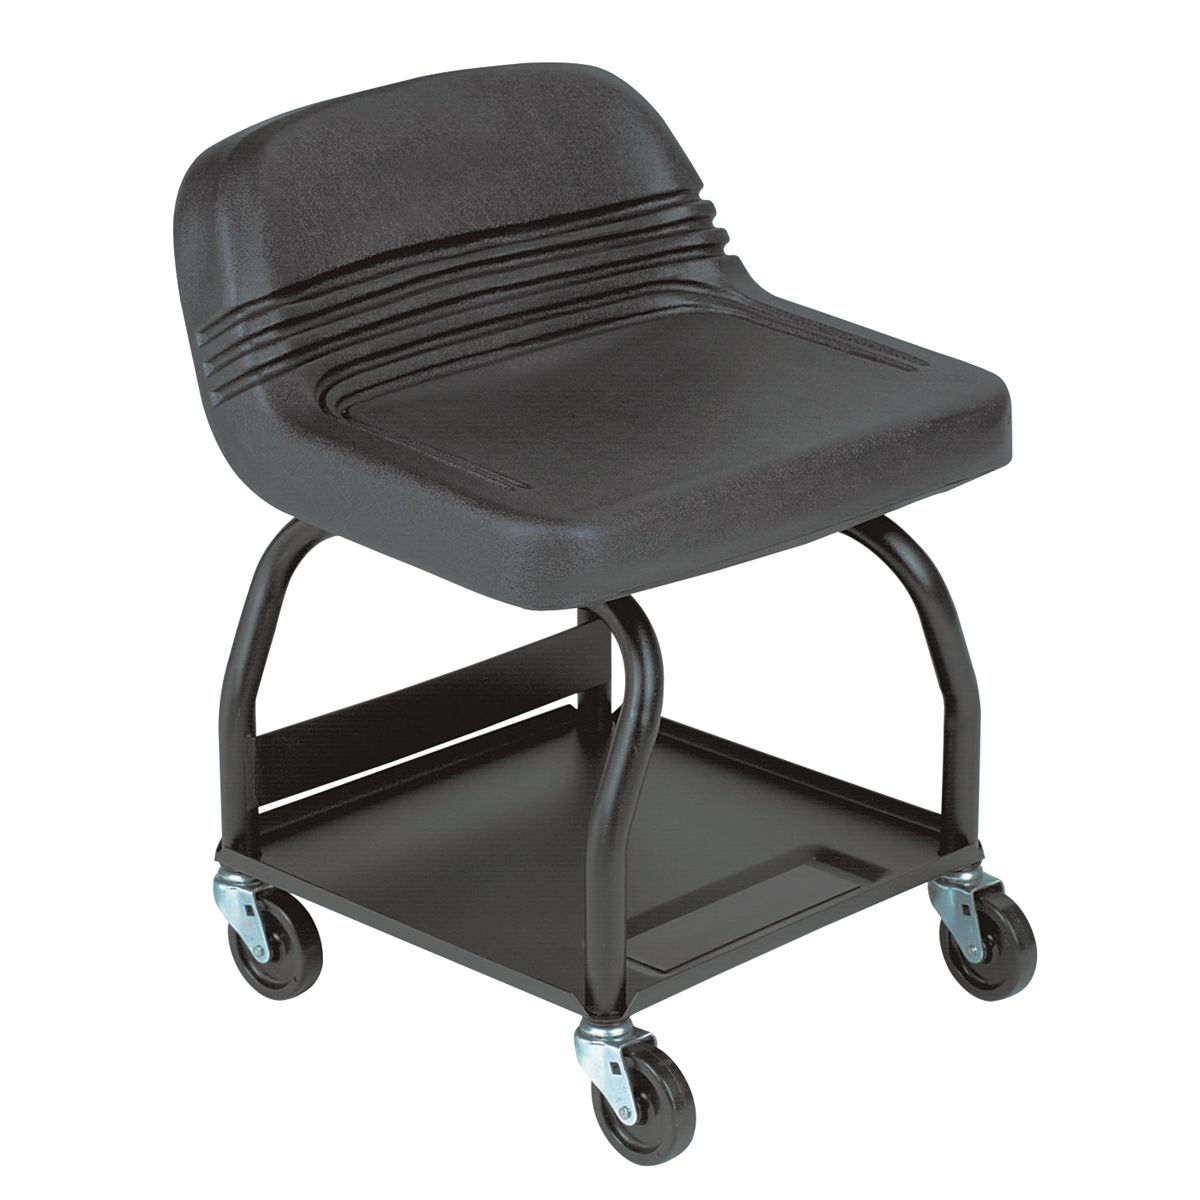 Whiteside Hrs Black Large Padded Shop Creeper Seat Whihrs